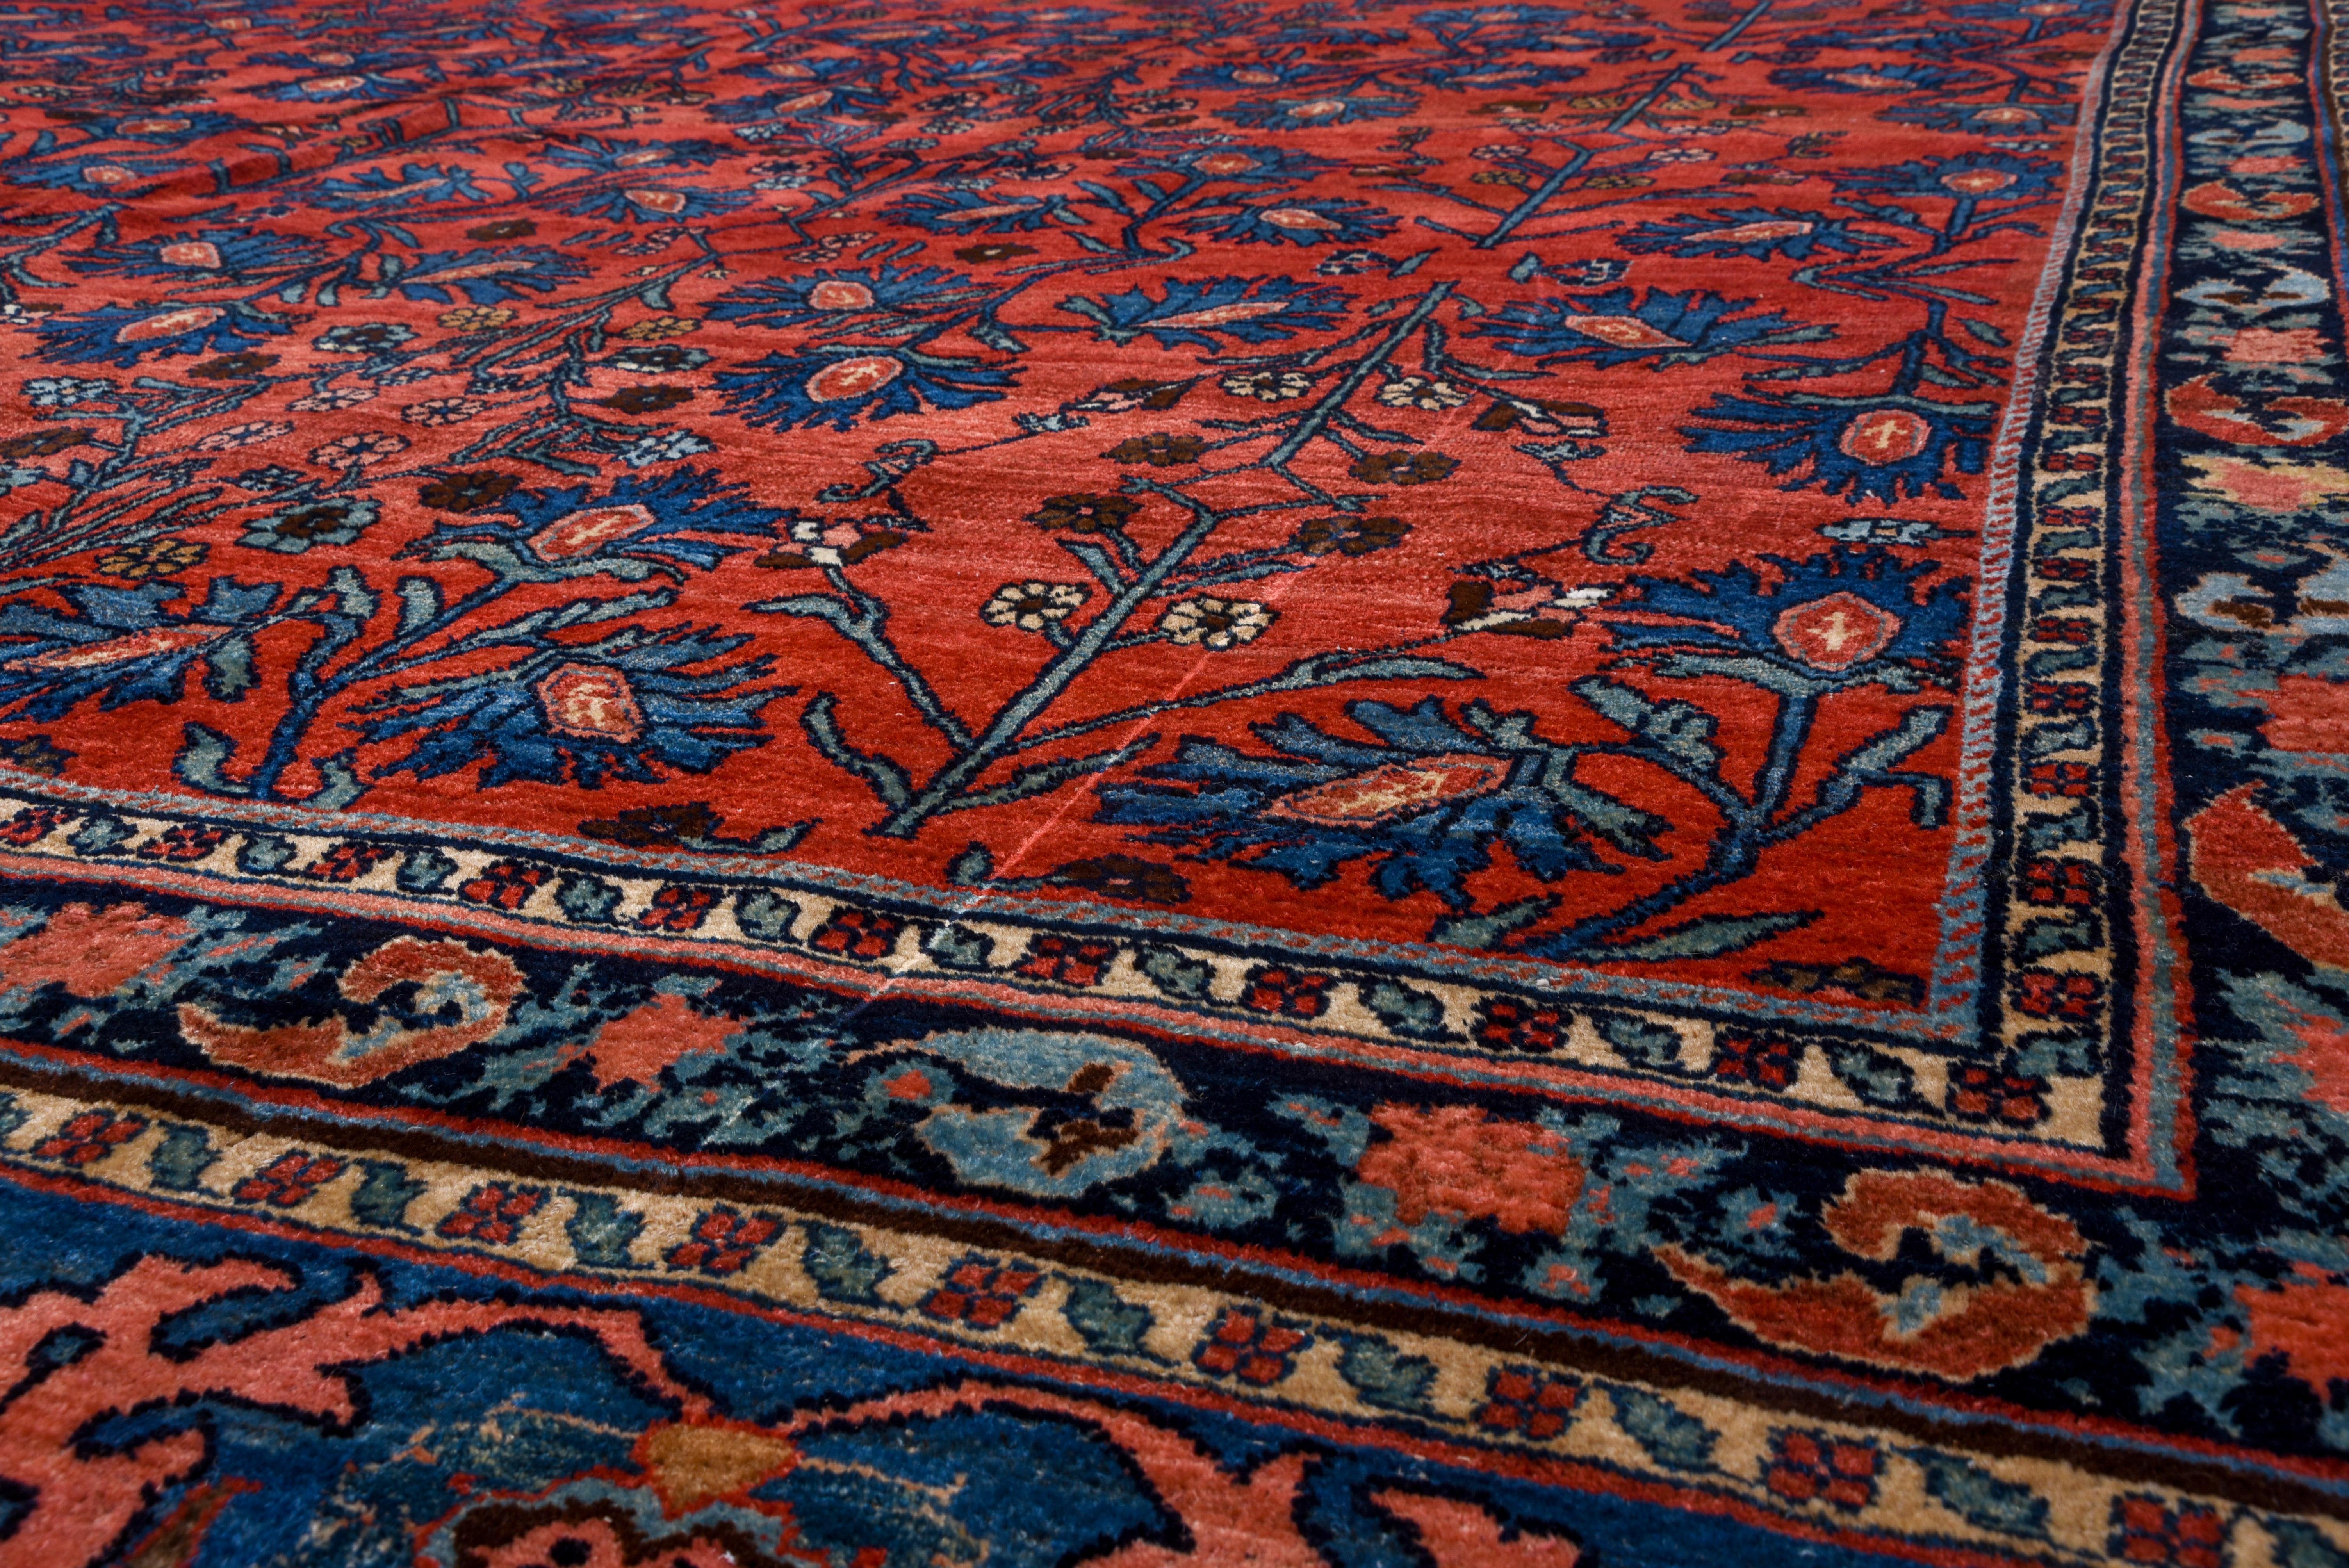 The superbly abrashed royal blue ground displays five repeats of cartouche palmettes, stems, bitonal rough leaves, and short vine segments. The soft coral red border presents geometric palmettes and lancet leaves. A est Persian Kurdish workshop